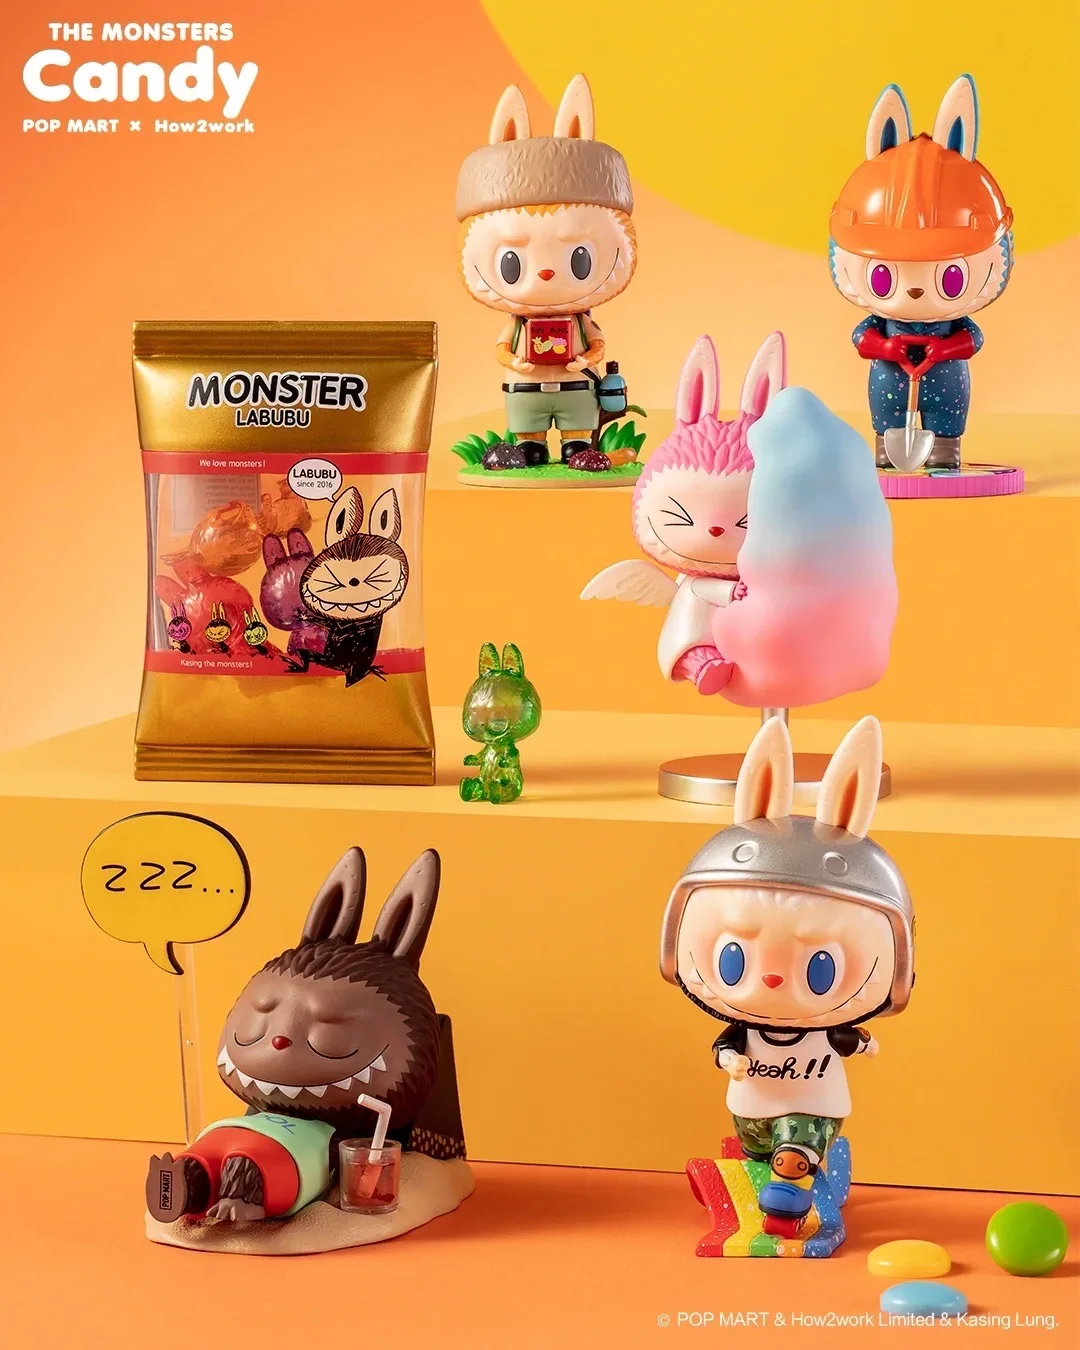 

POP MART The Monsters Candy Series Mystery Box Action Figurine Labubu Blind Box Toys Ornaments Home Decor Cute Birthday Gift PO